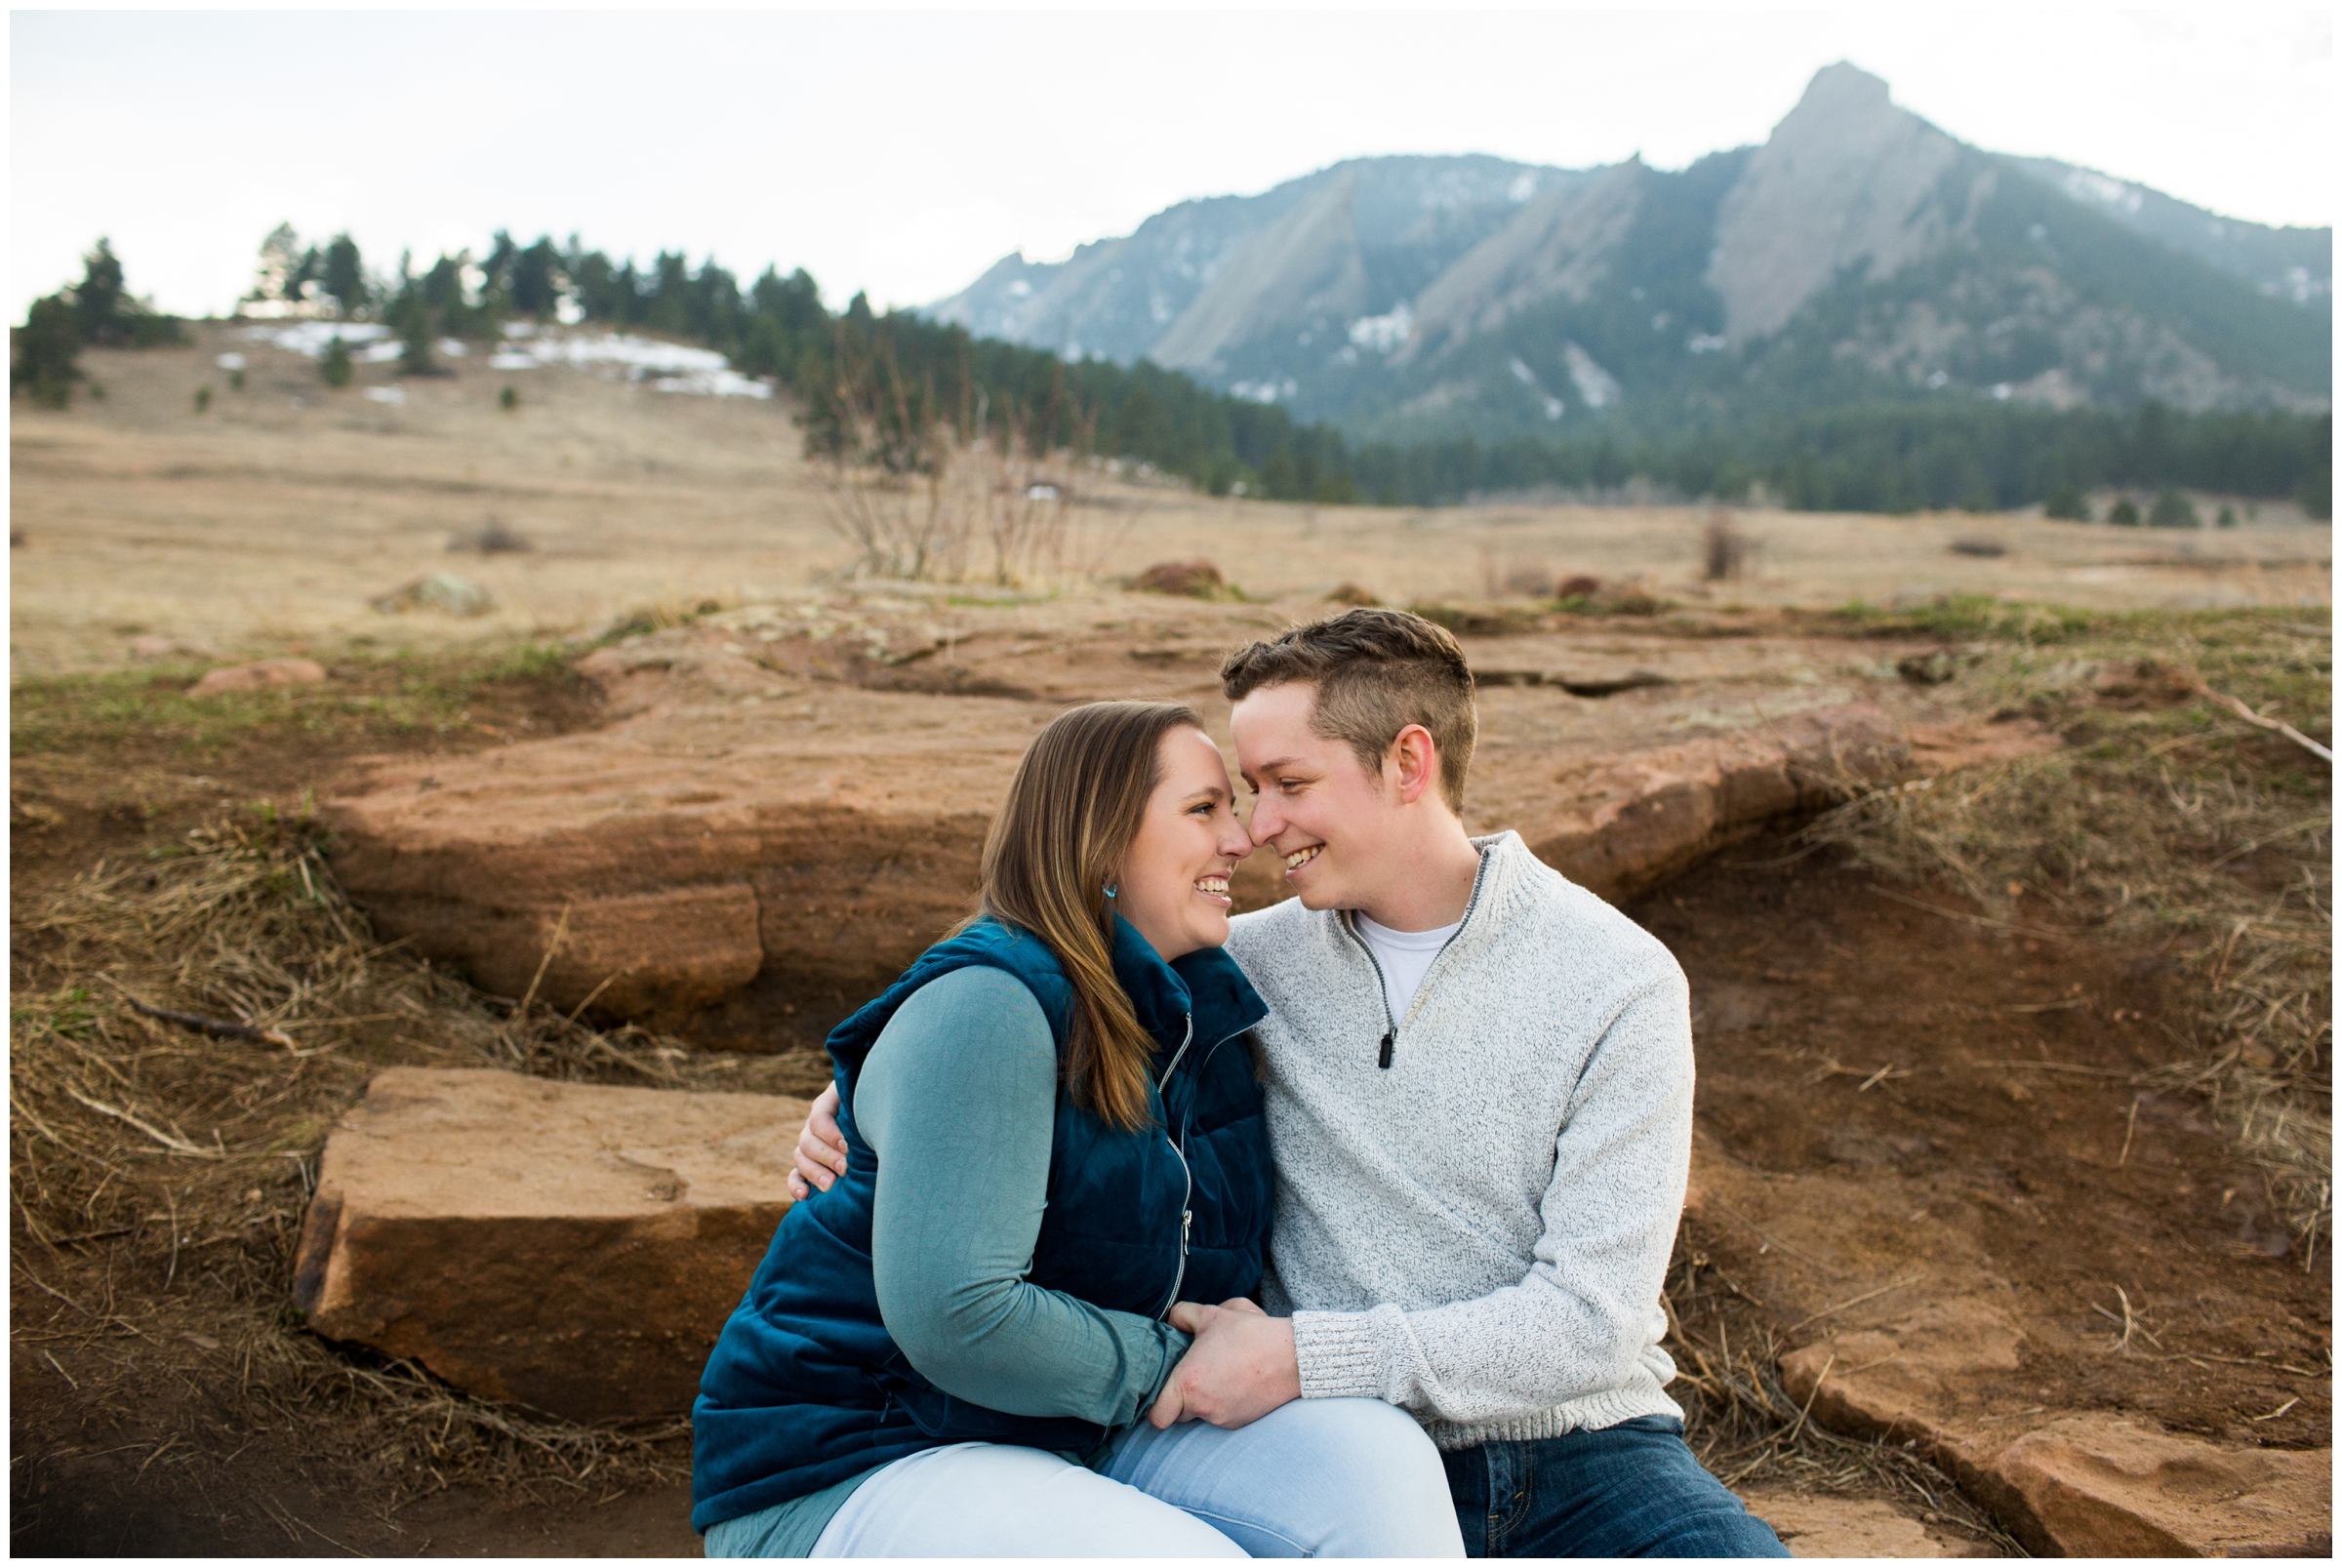 spring engagement photography inspiration at Chautauqua in Boulder Colorado 